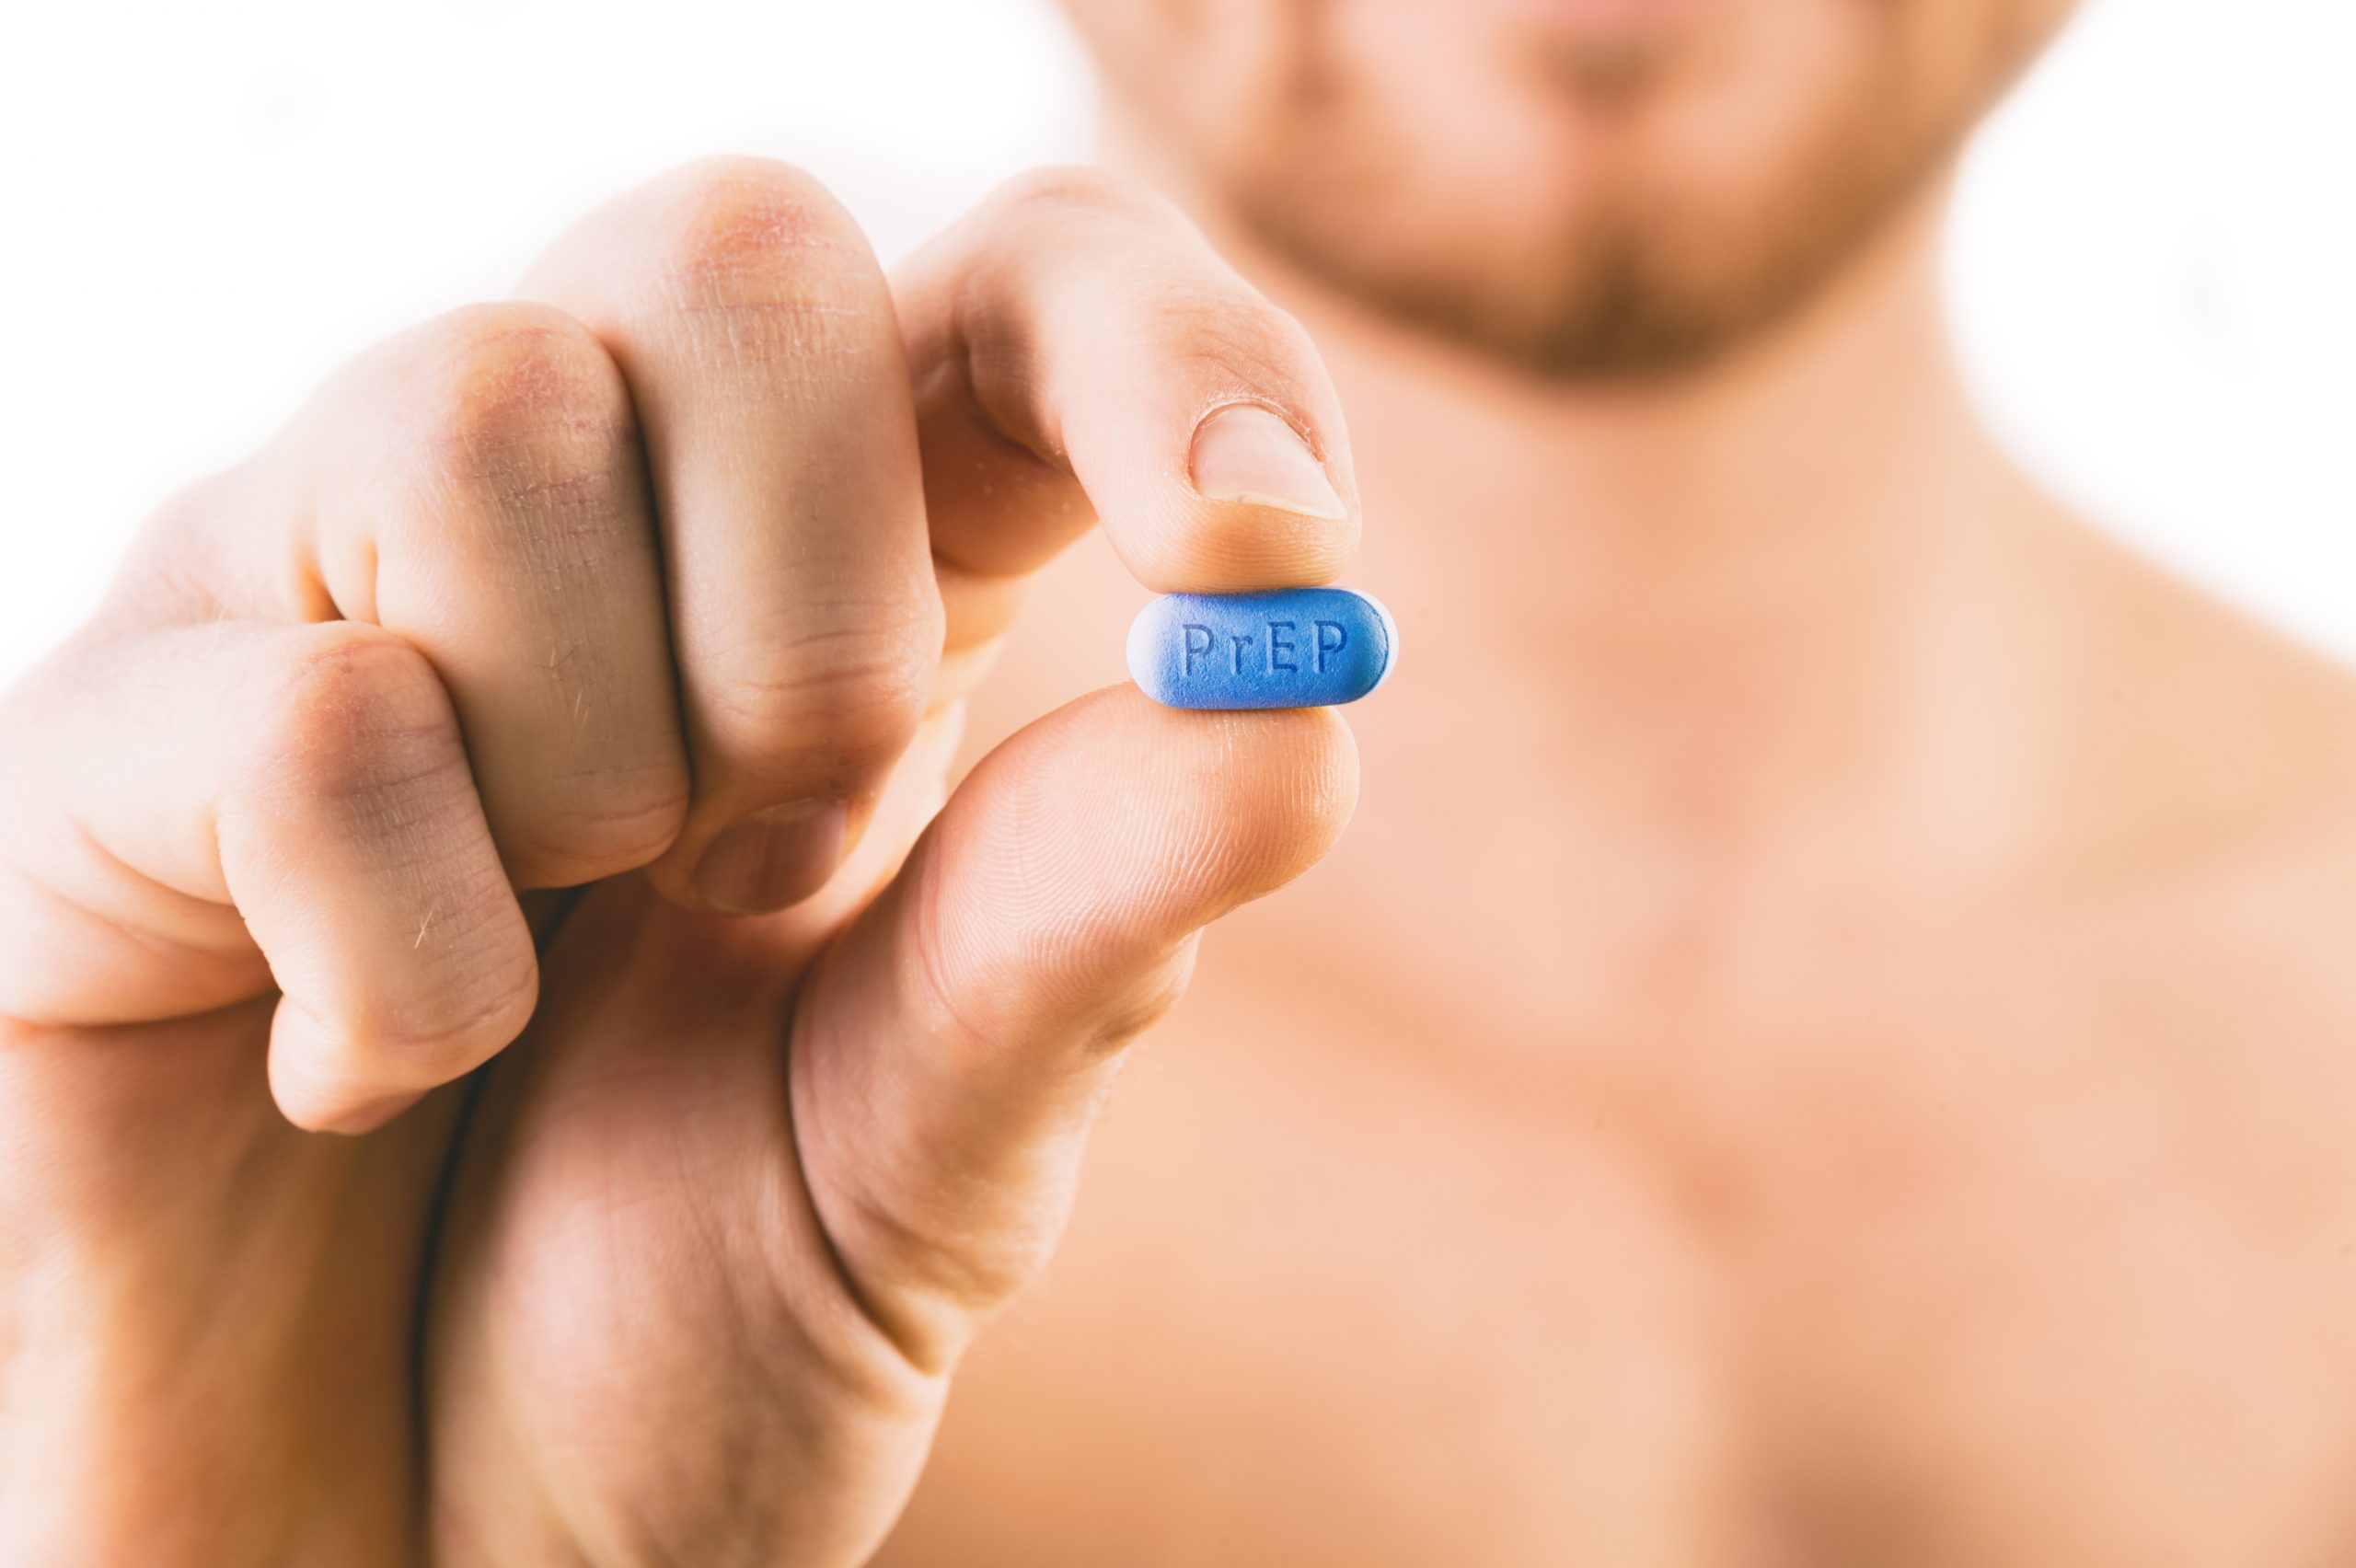 Man holding a pill used for Pre-Exposure Prophylaxis (PrEP) to prevent HIV infection